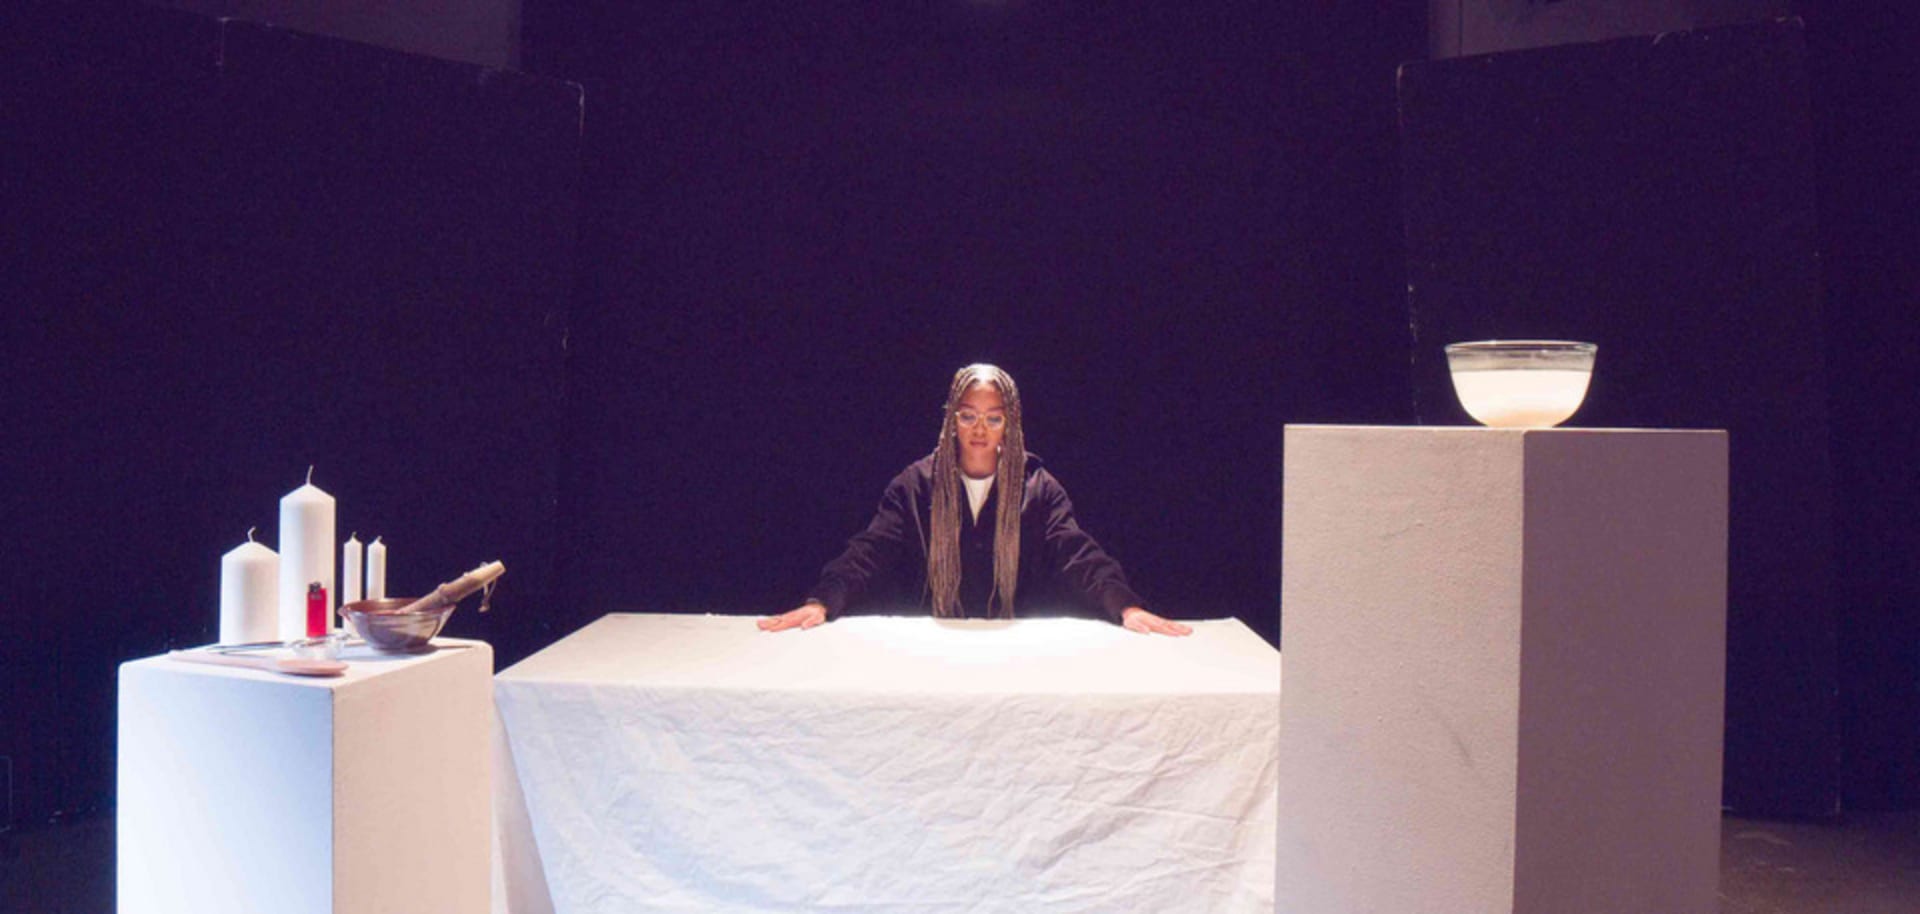 Wide shot of light brown woman with long braids and her hands on a white table; two plinths in front with props on them